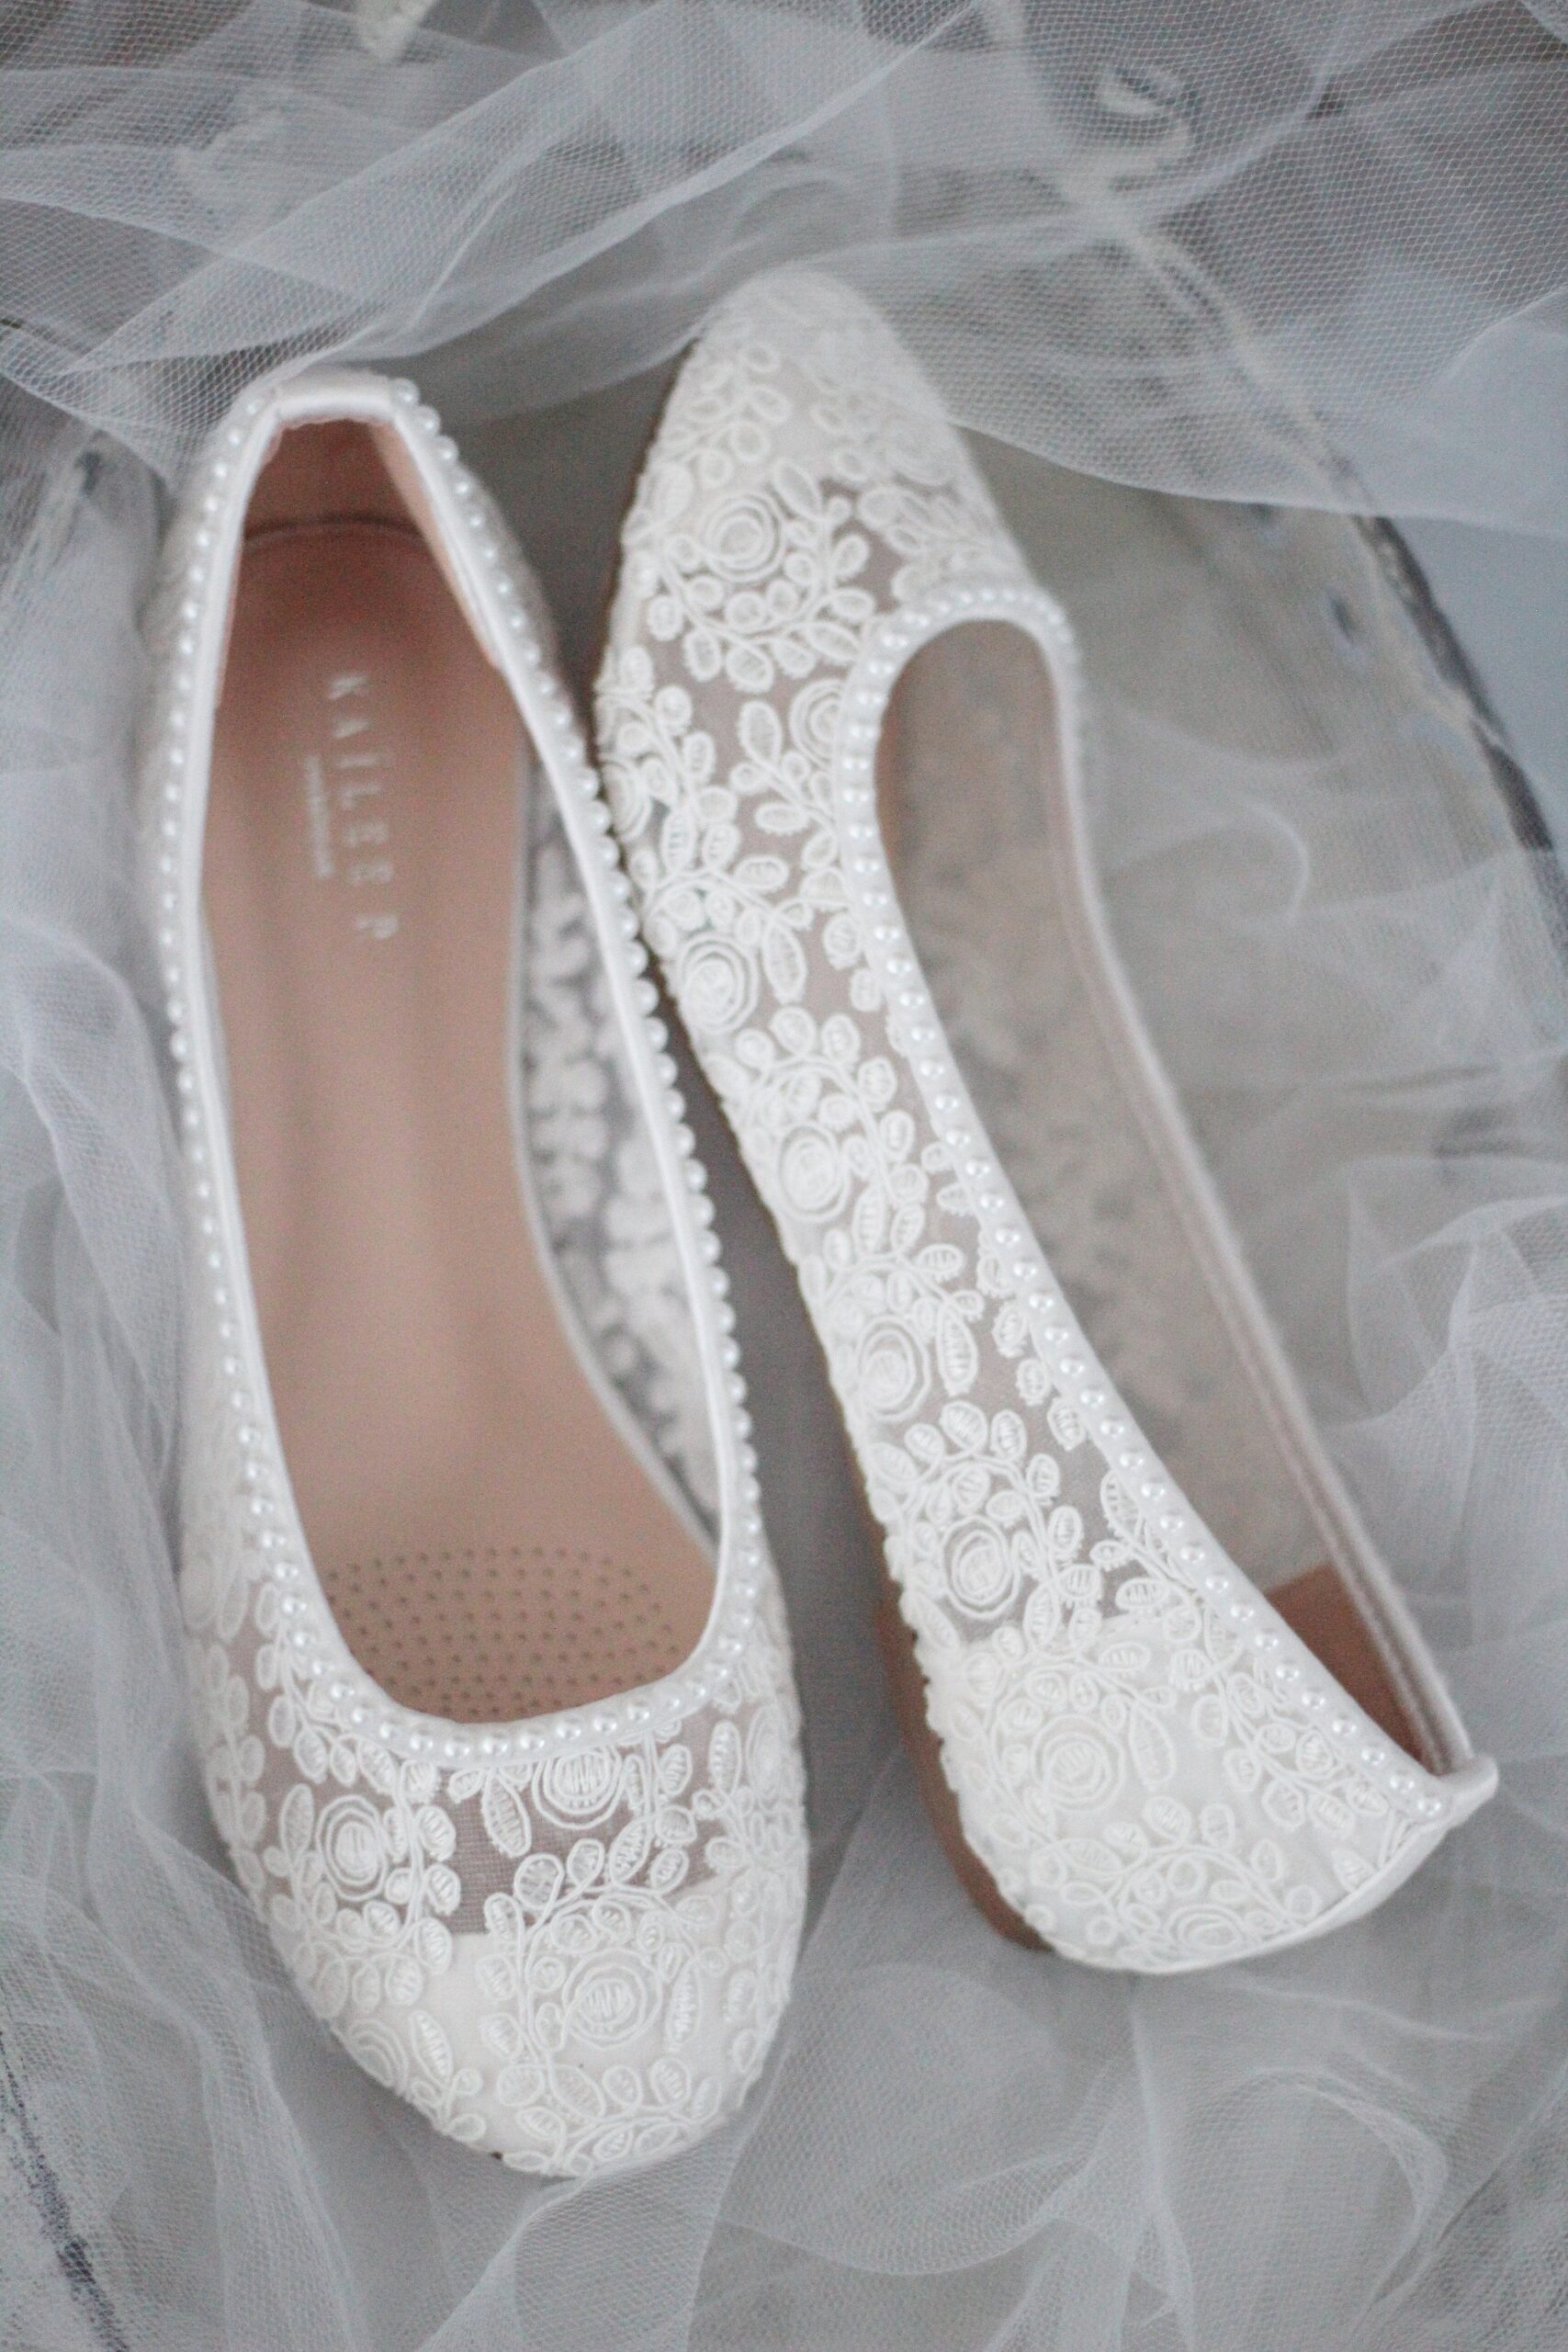 Makes you feel comfortable with wedding
flats on your wedding day